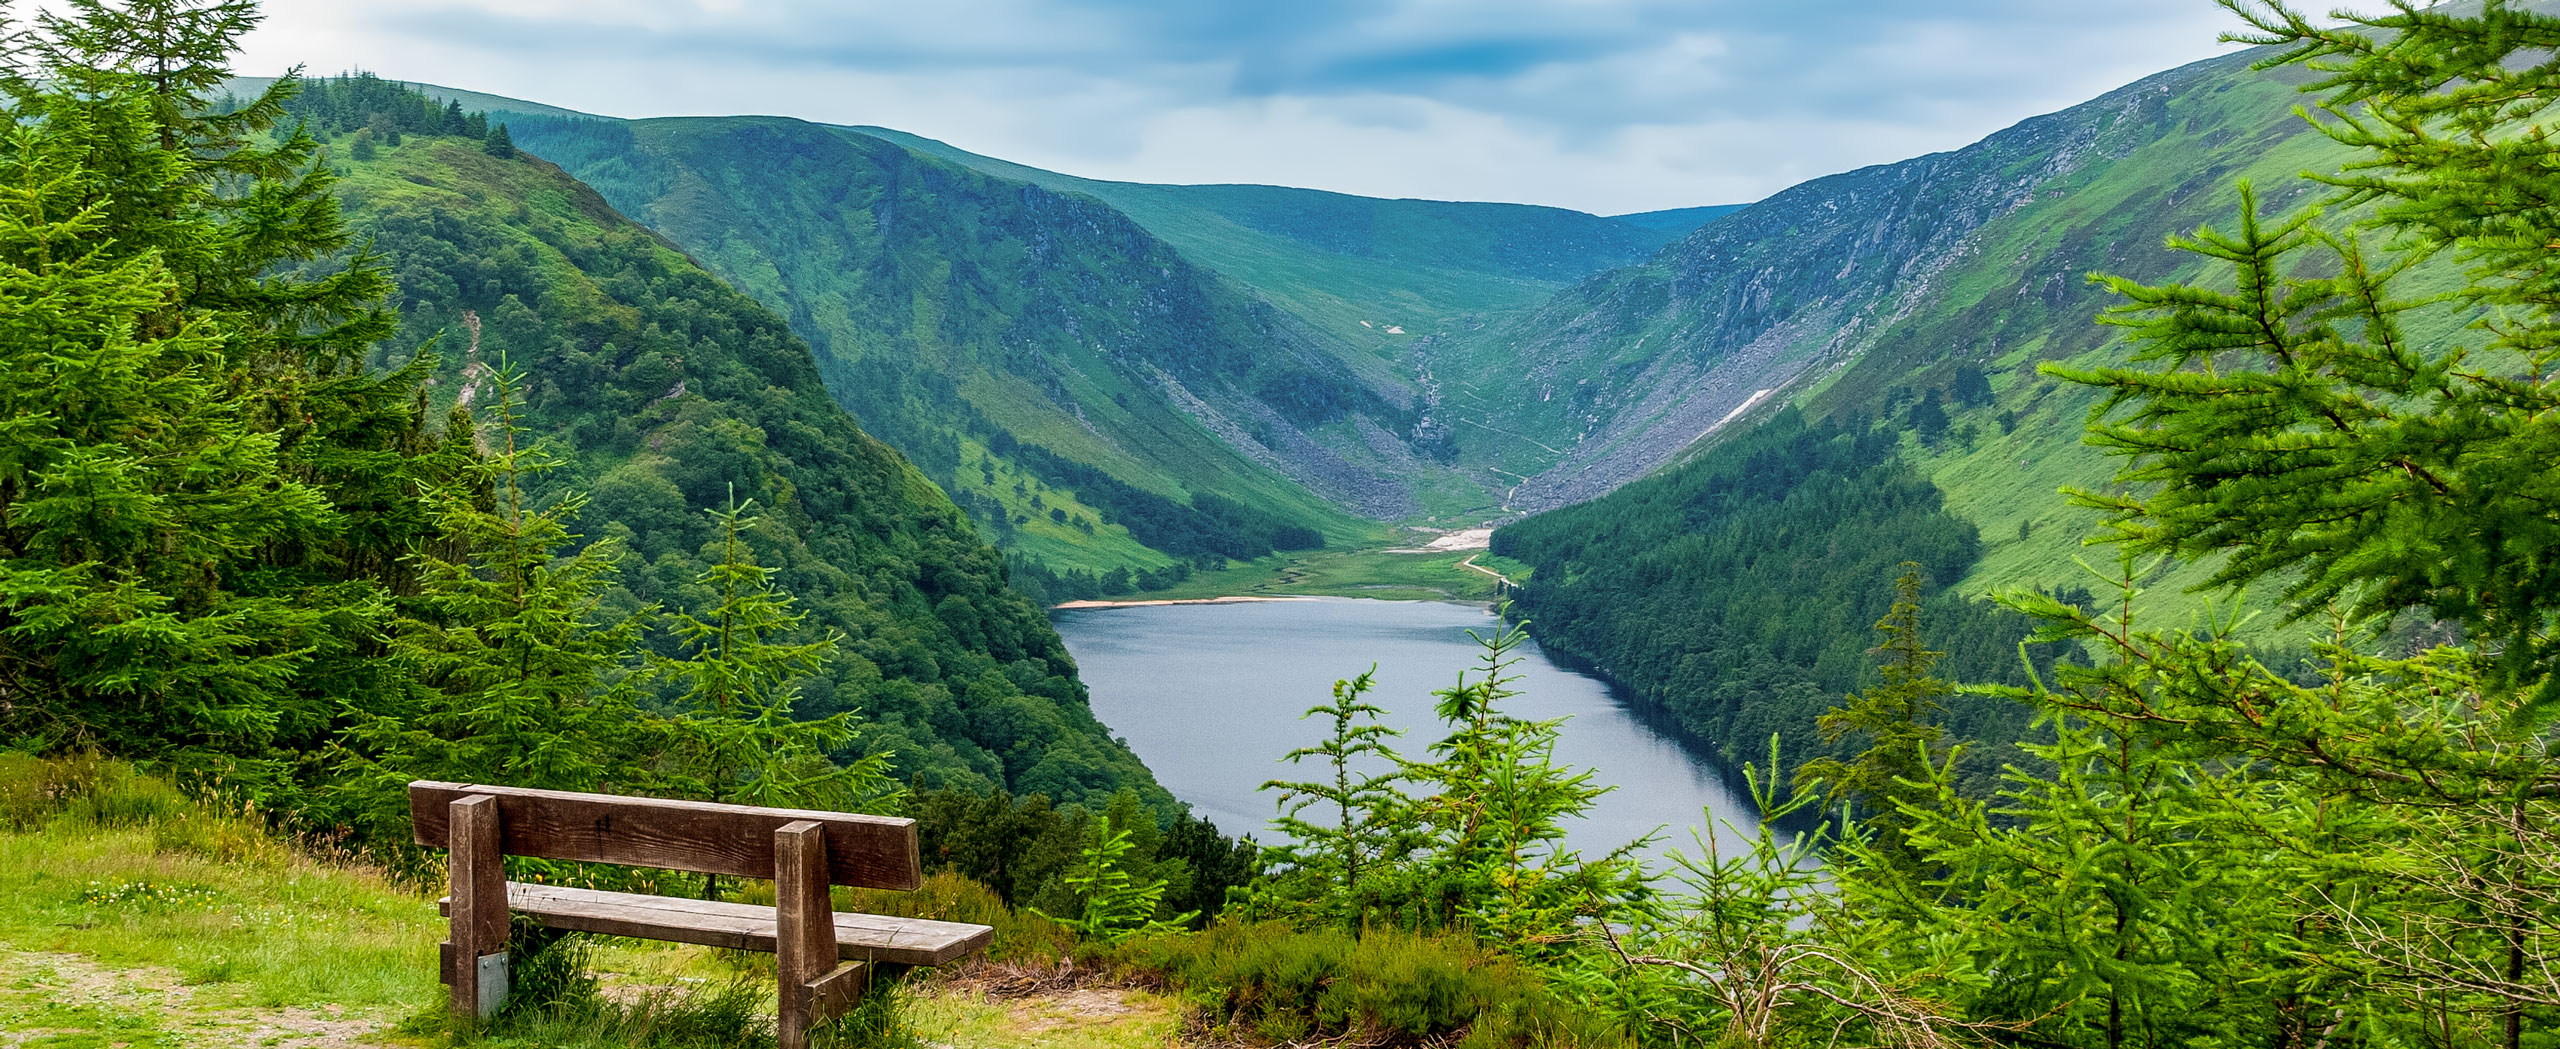 5-Day Self-Guided Wicklow Way Hiking Tour